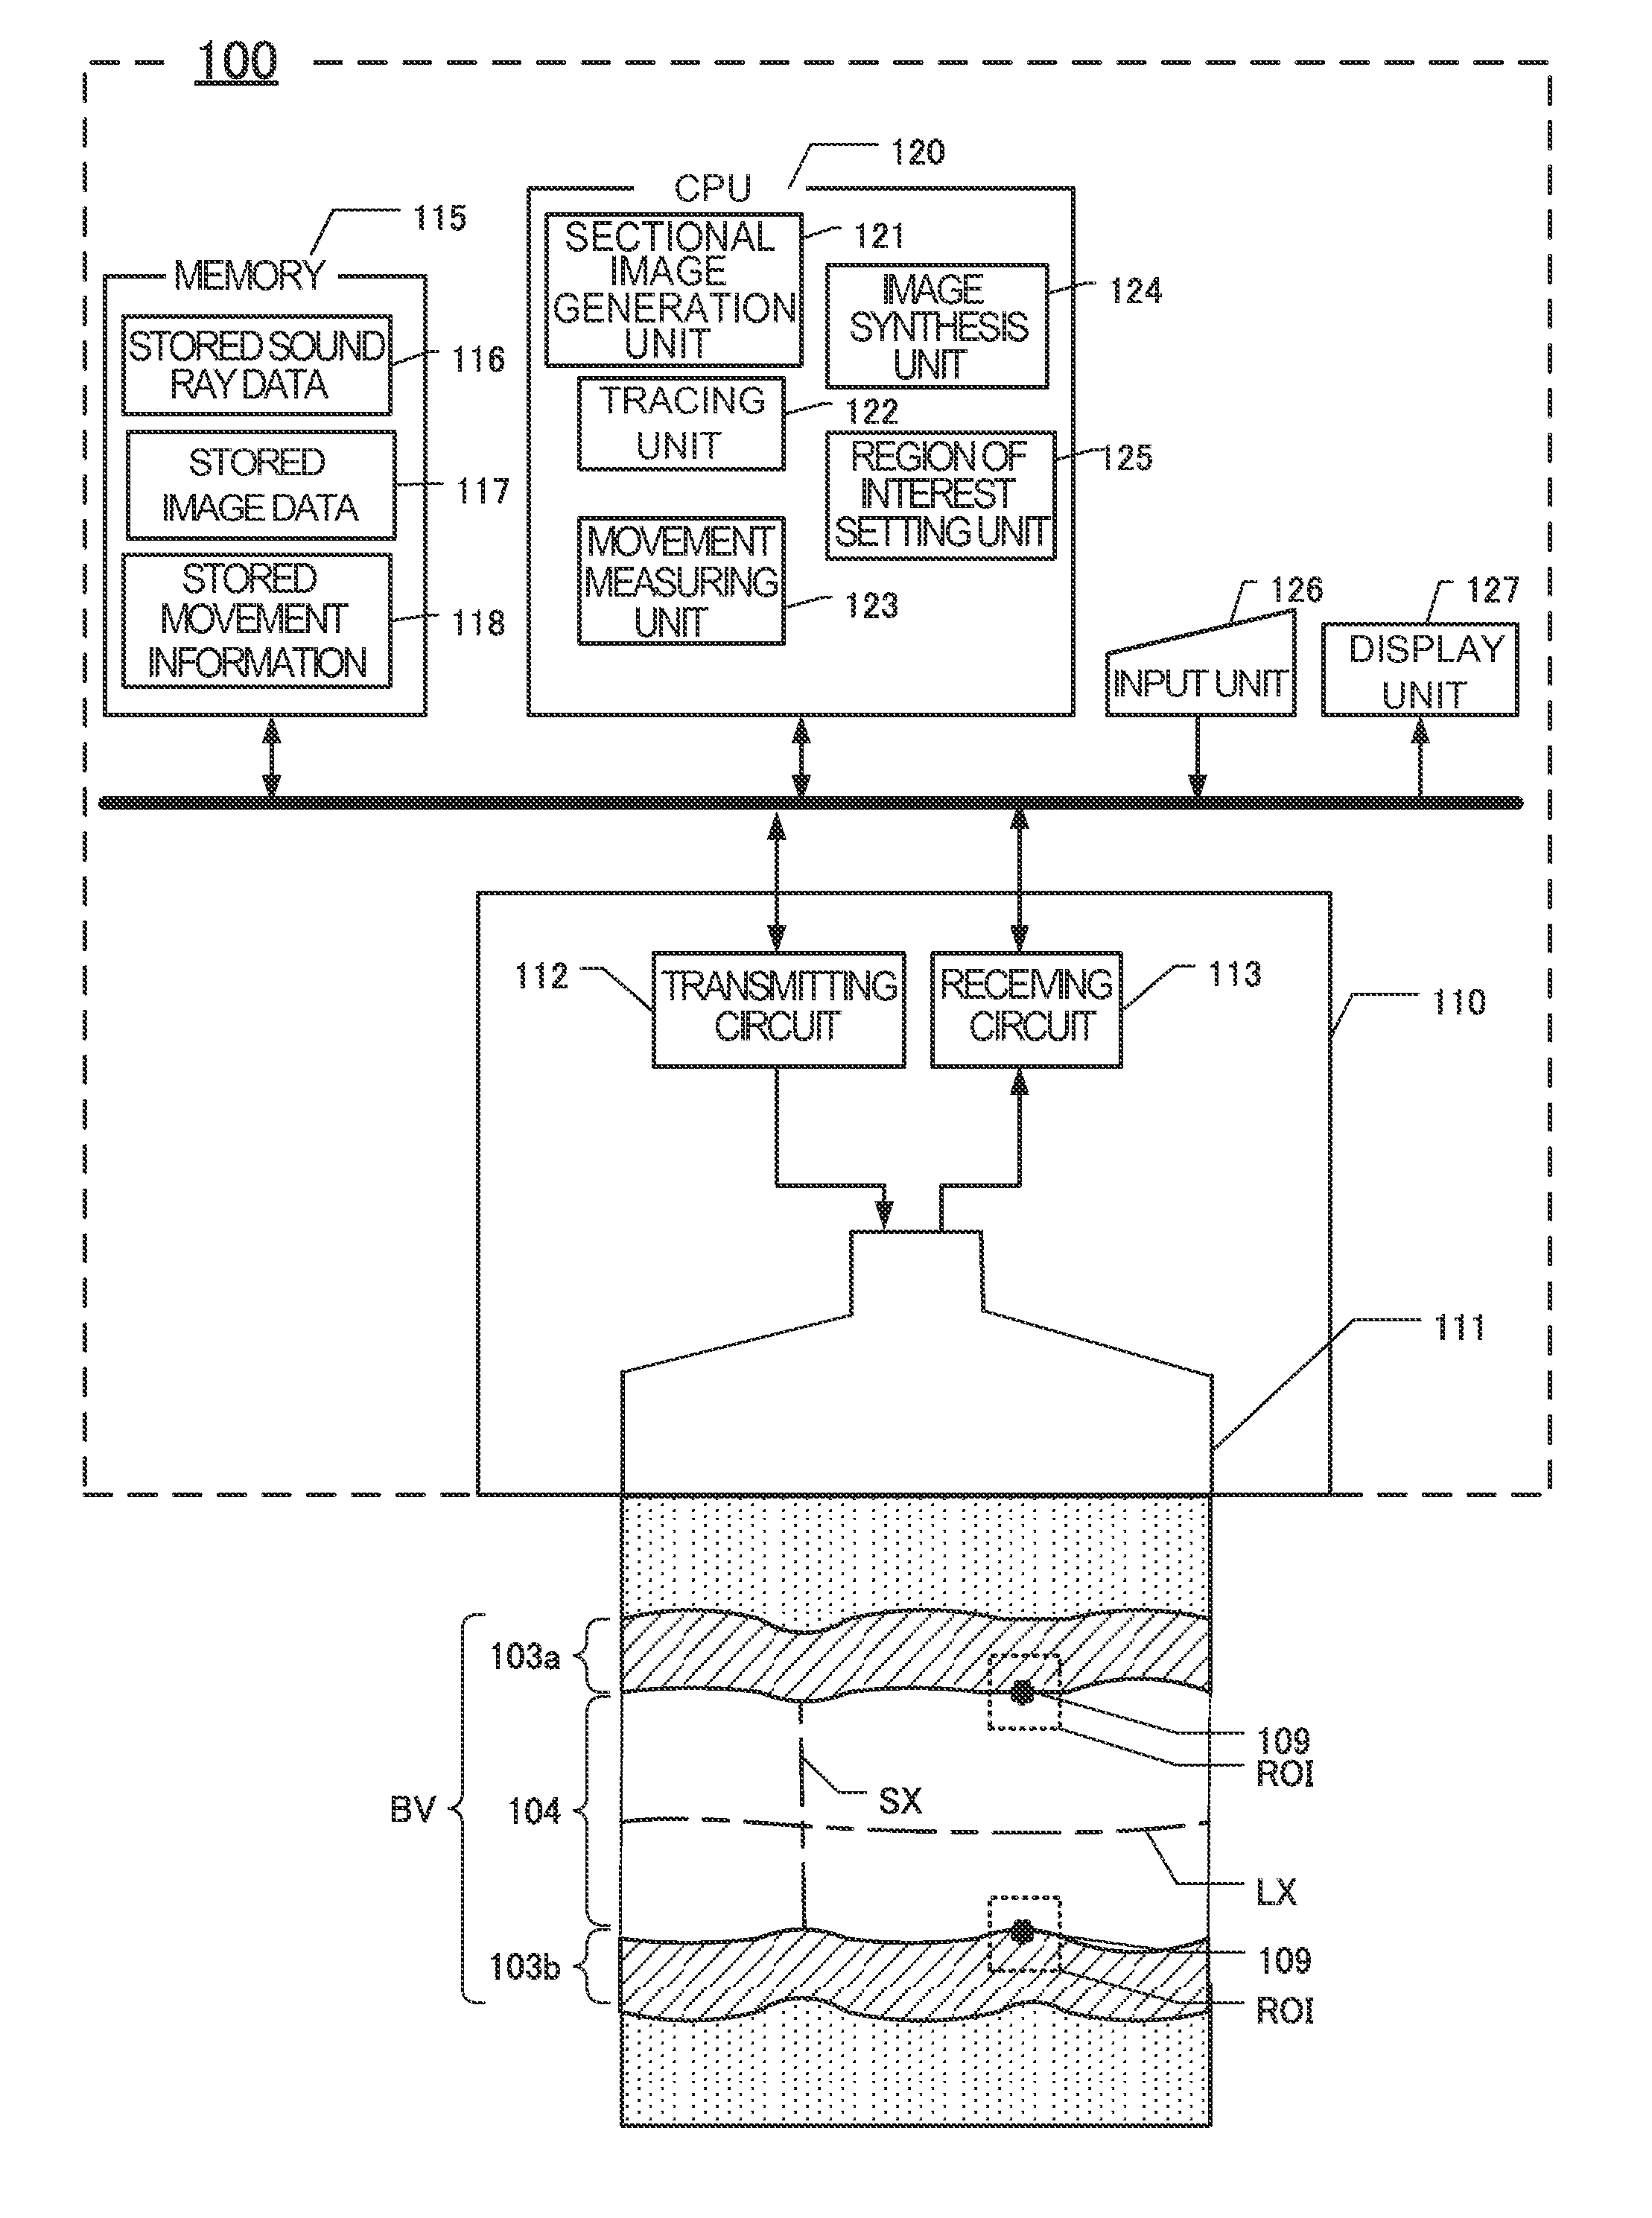 Ultrasound diagnostic apparatus and method for tracing movement of tissue